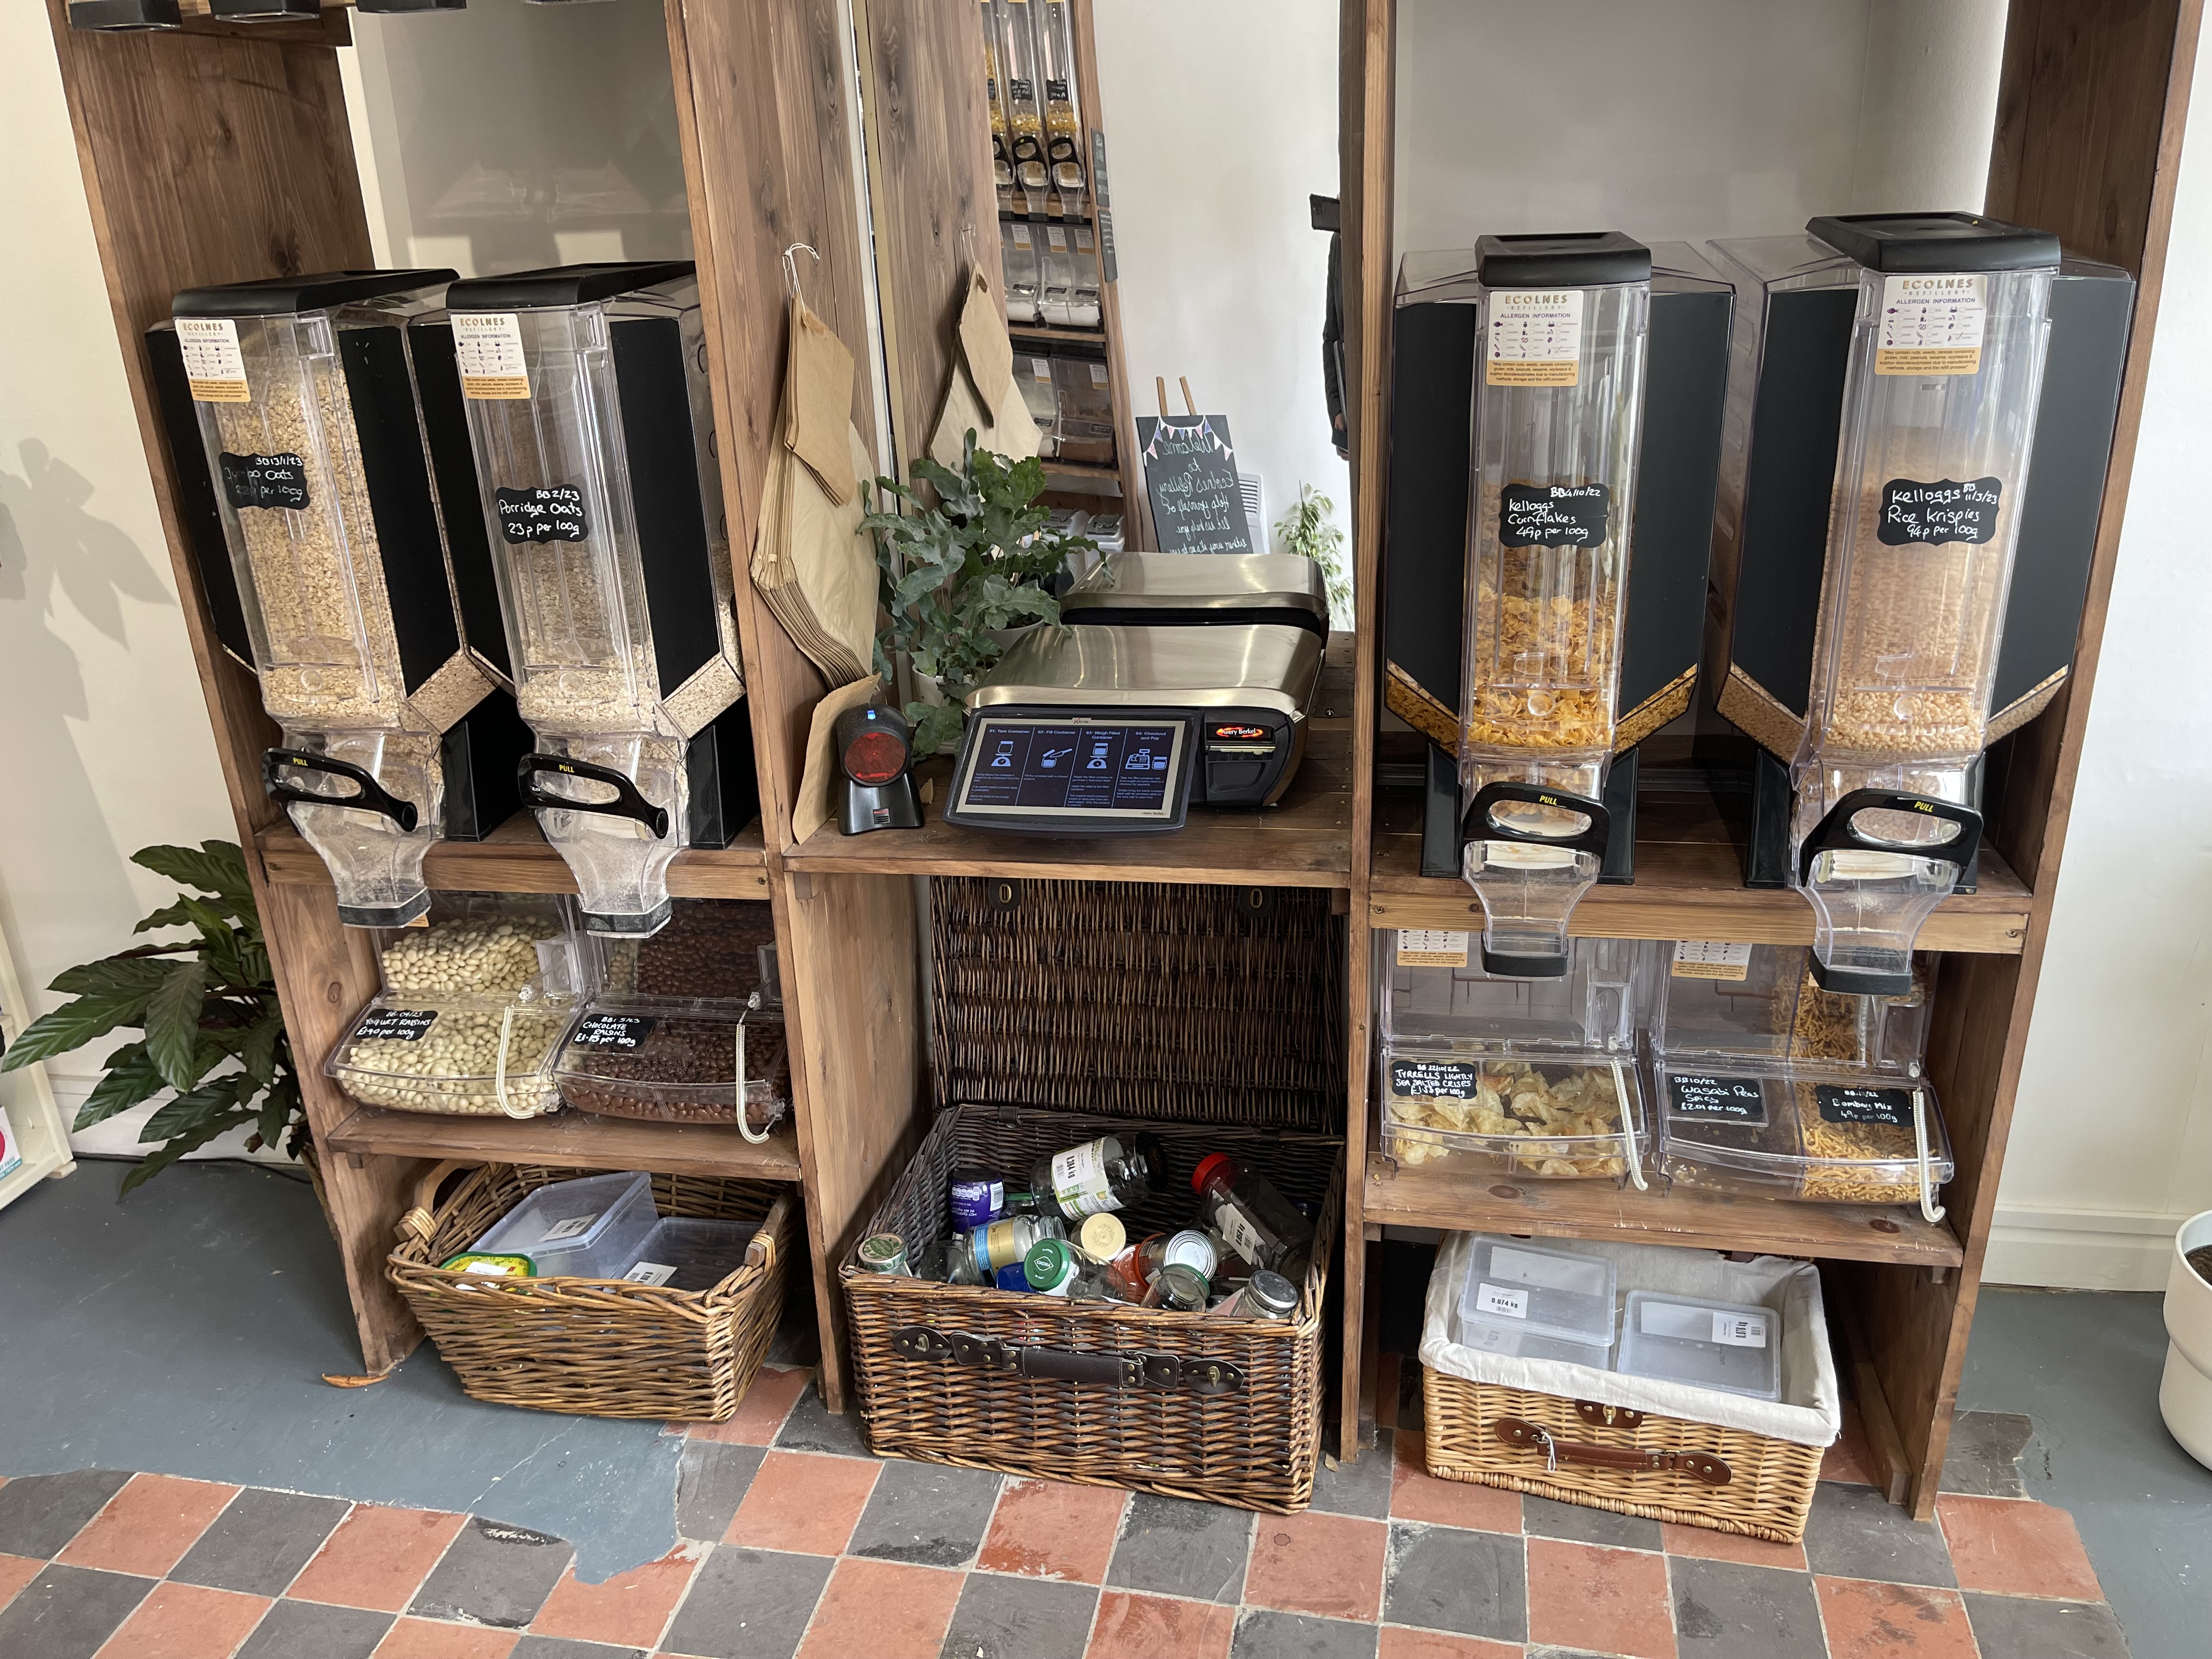 Photo showing products in a refill shop